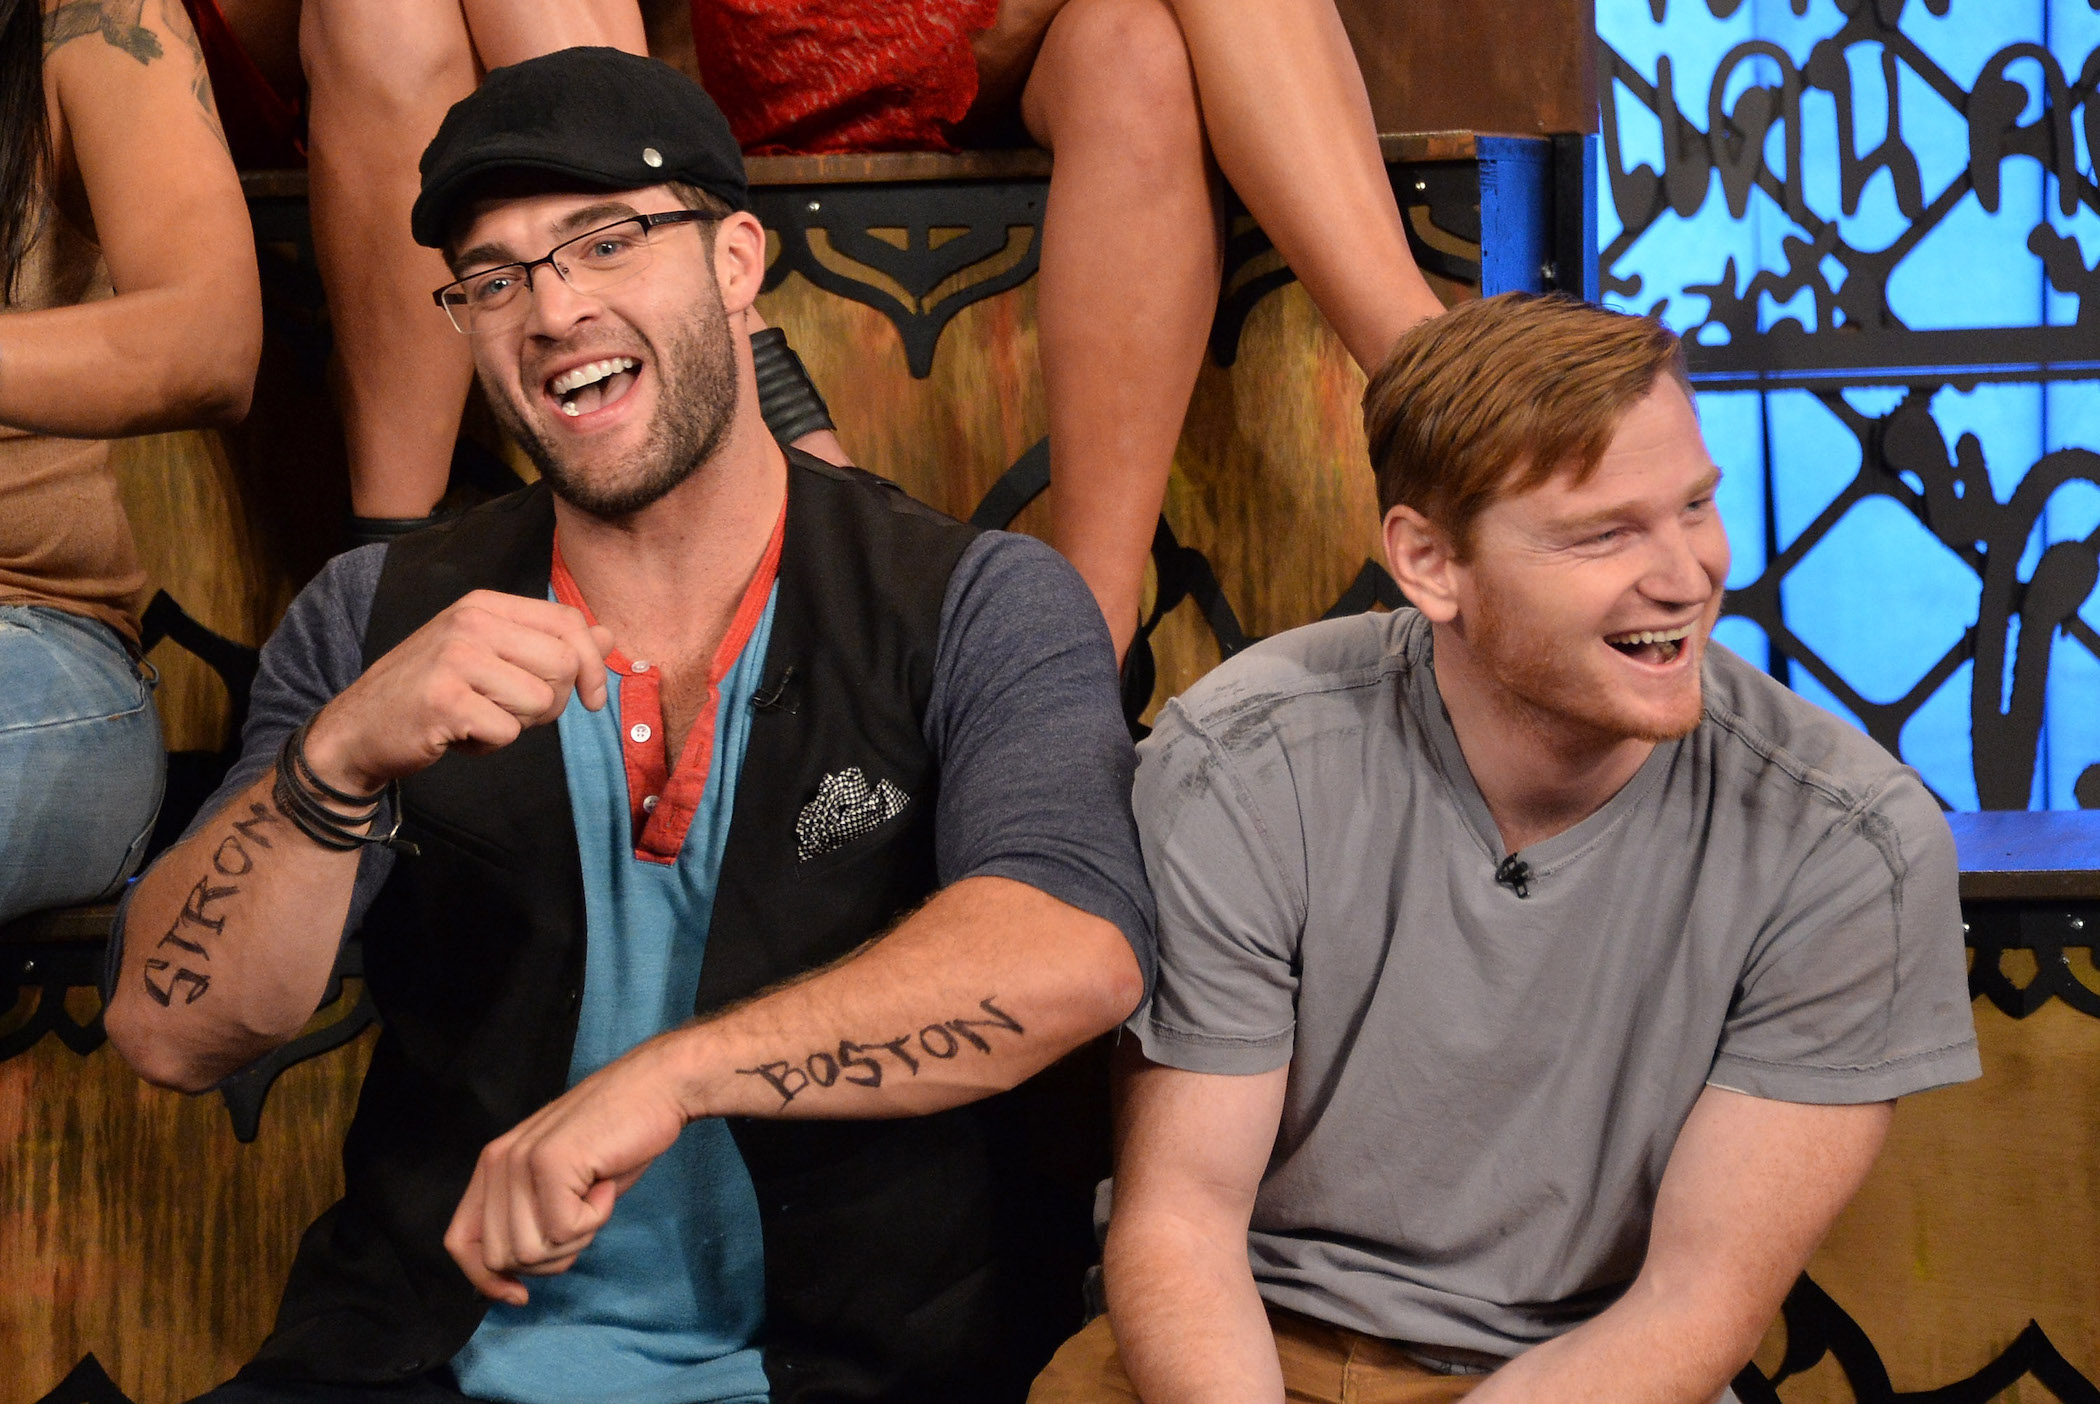 CT Tamburello from 'The Challenge' Season 37 and Wes Bergmann sitting together and laughing at 'The Challenge: Rivals II' final episode and reunion party